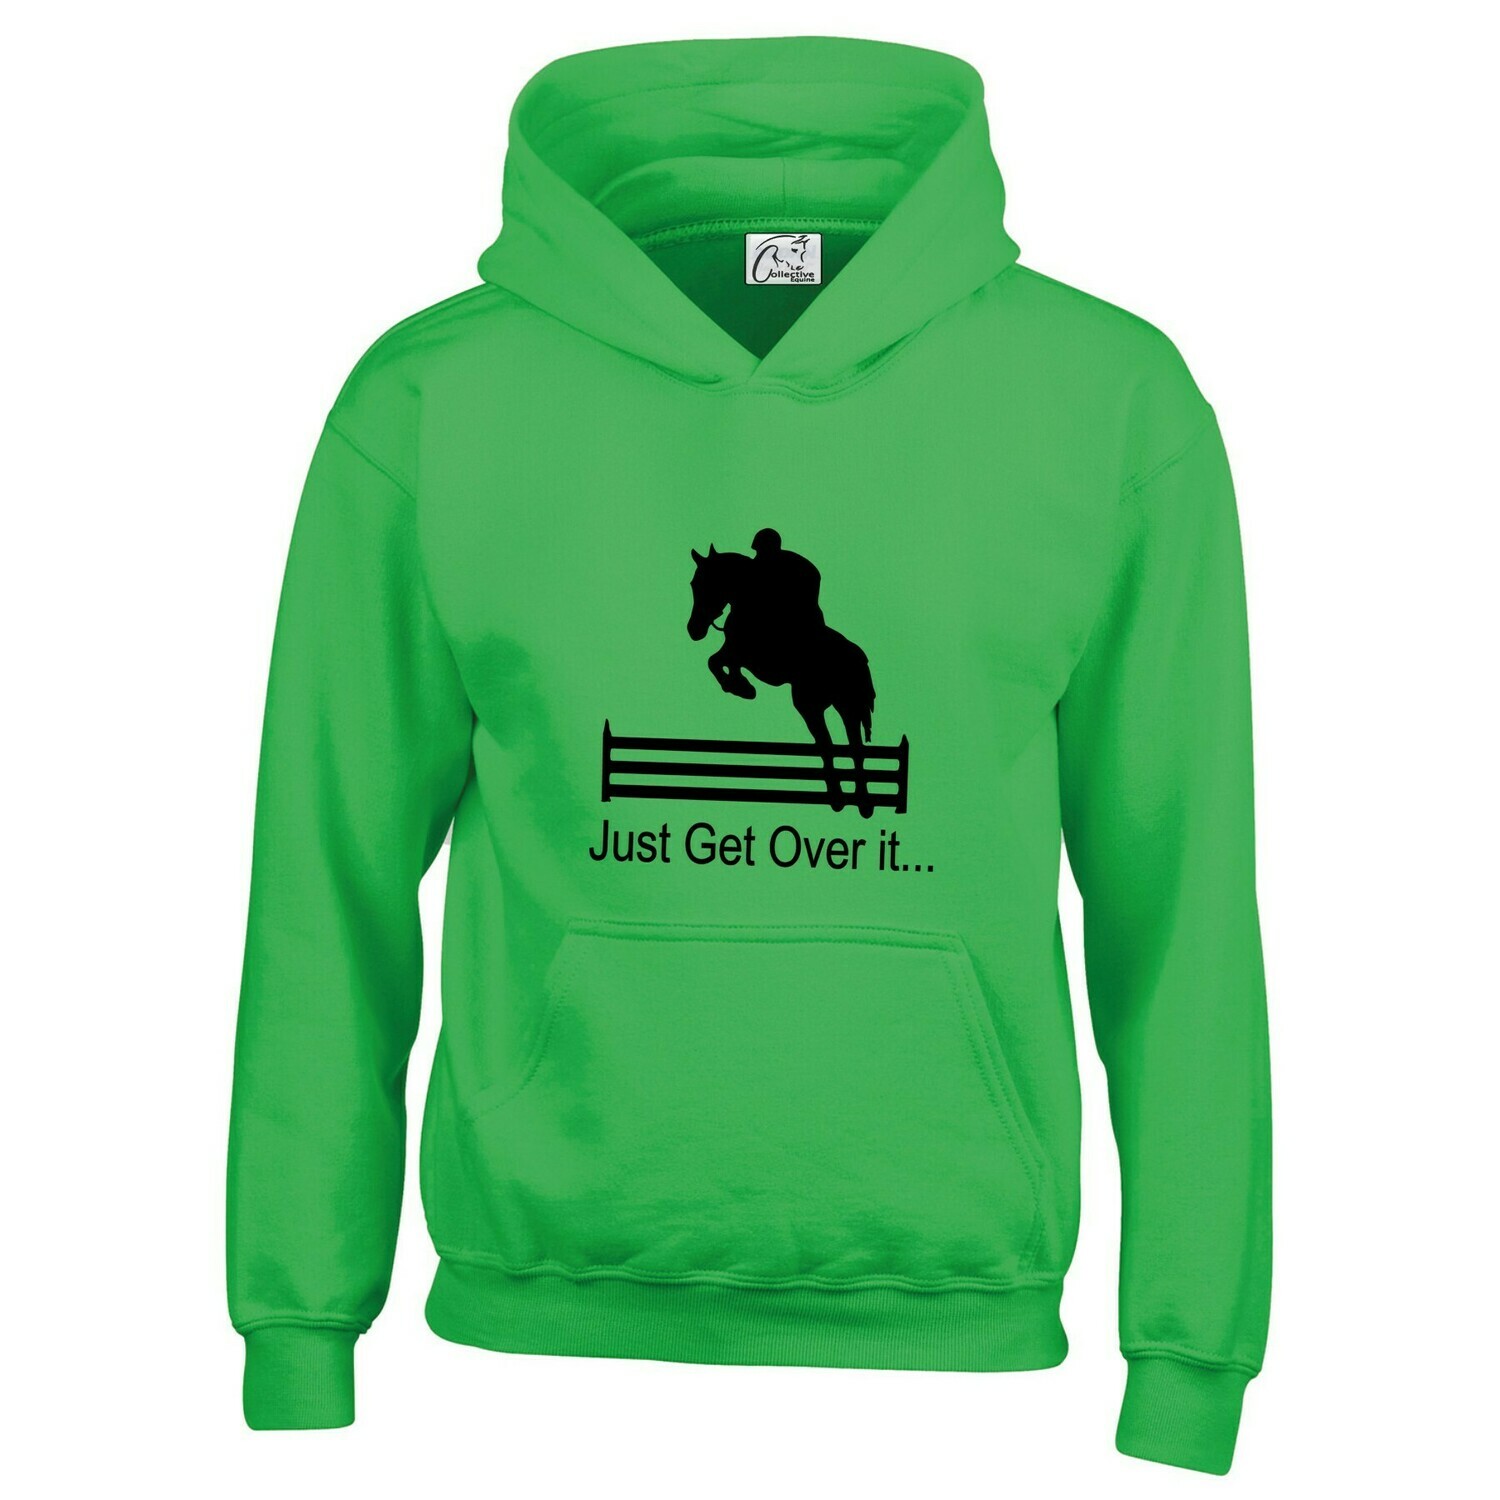 HOOFS equestrian adult hoody BURGUNDY pony camp horse jumping eventing hacking 